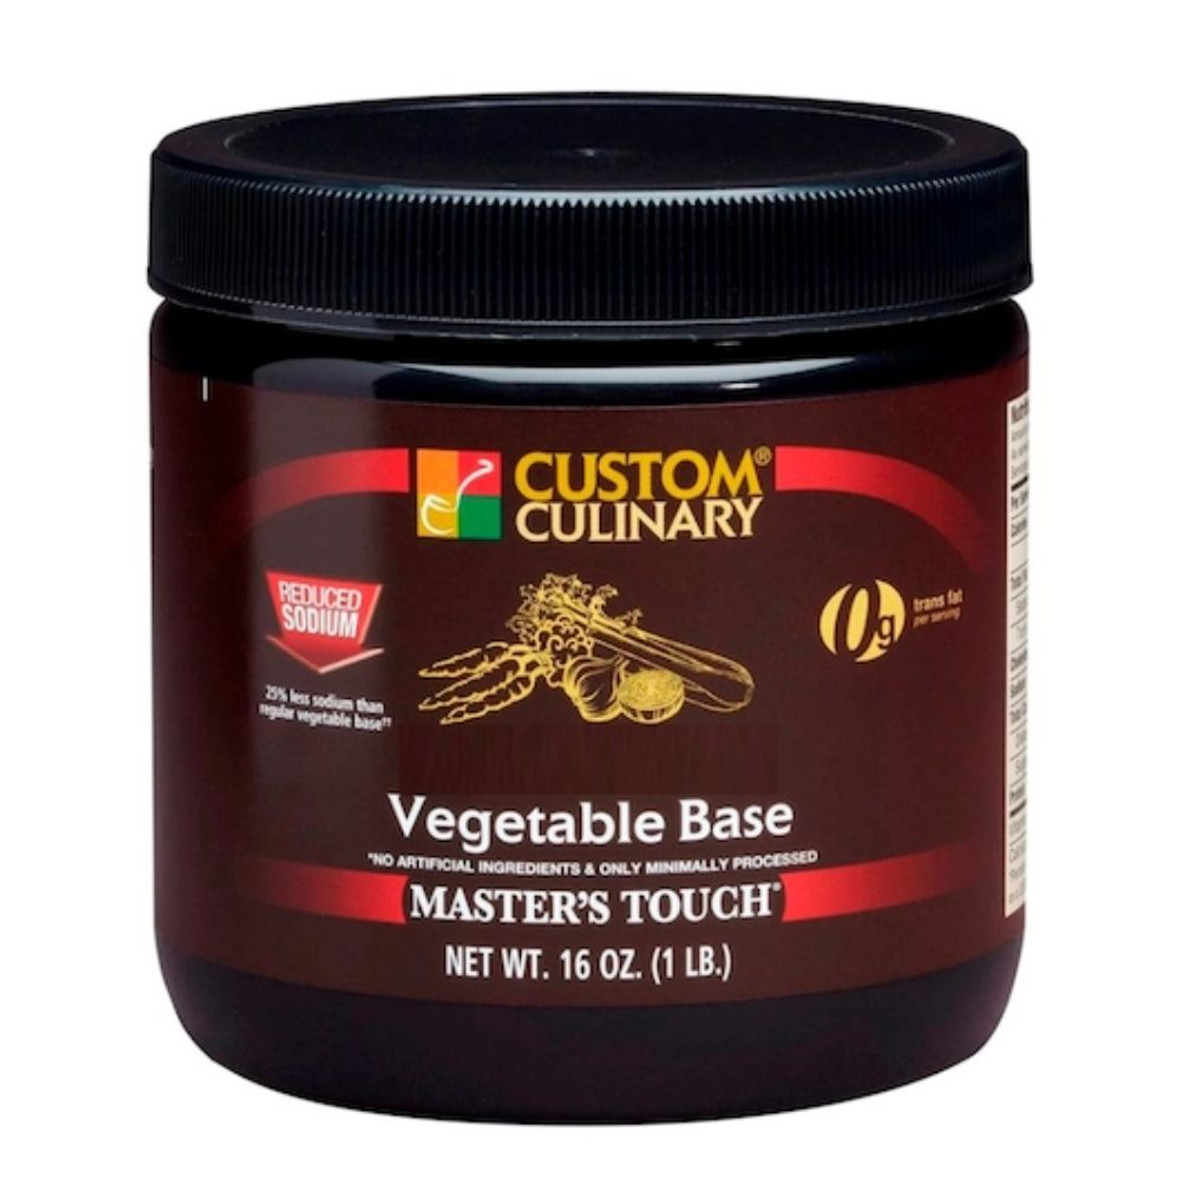 Masters Touch All Natural Gluten Free Reduced Sodium No Msg Added Vegan Vegetable Base